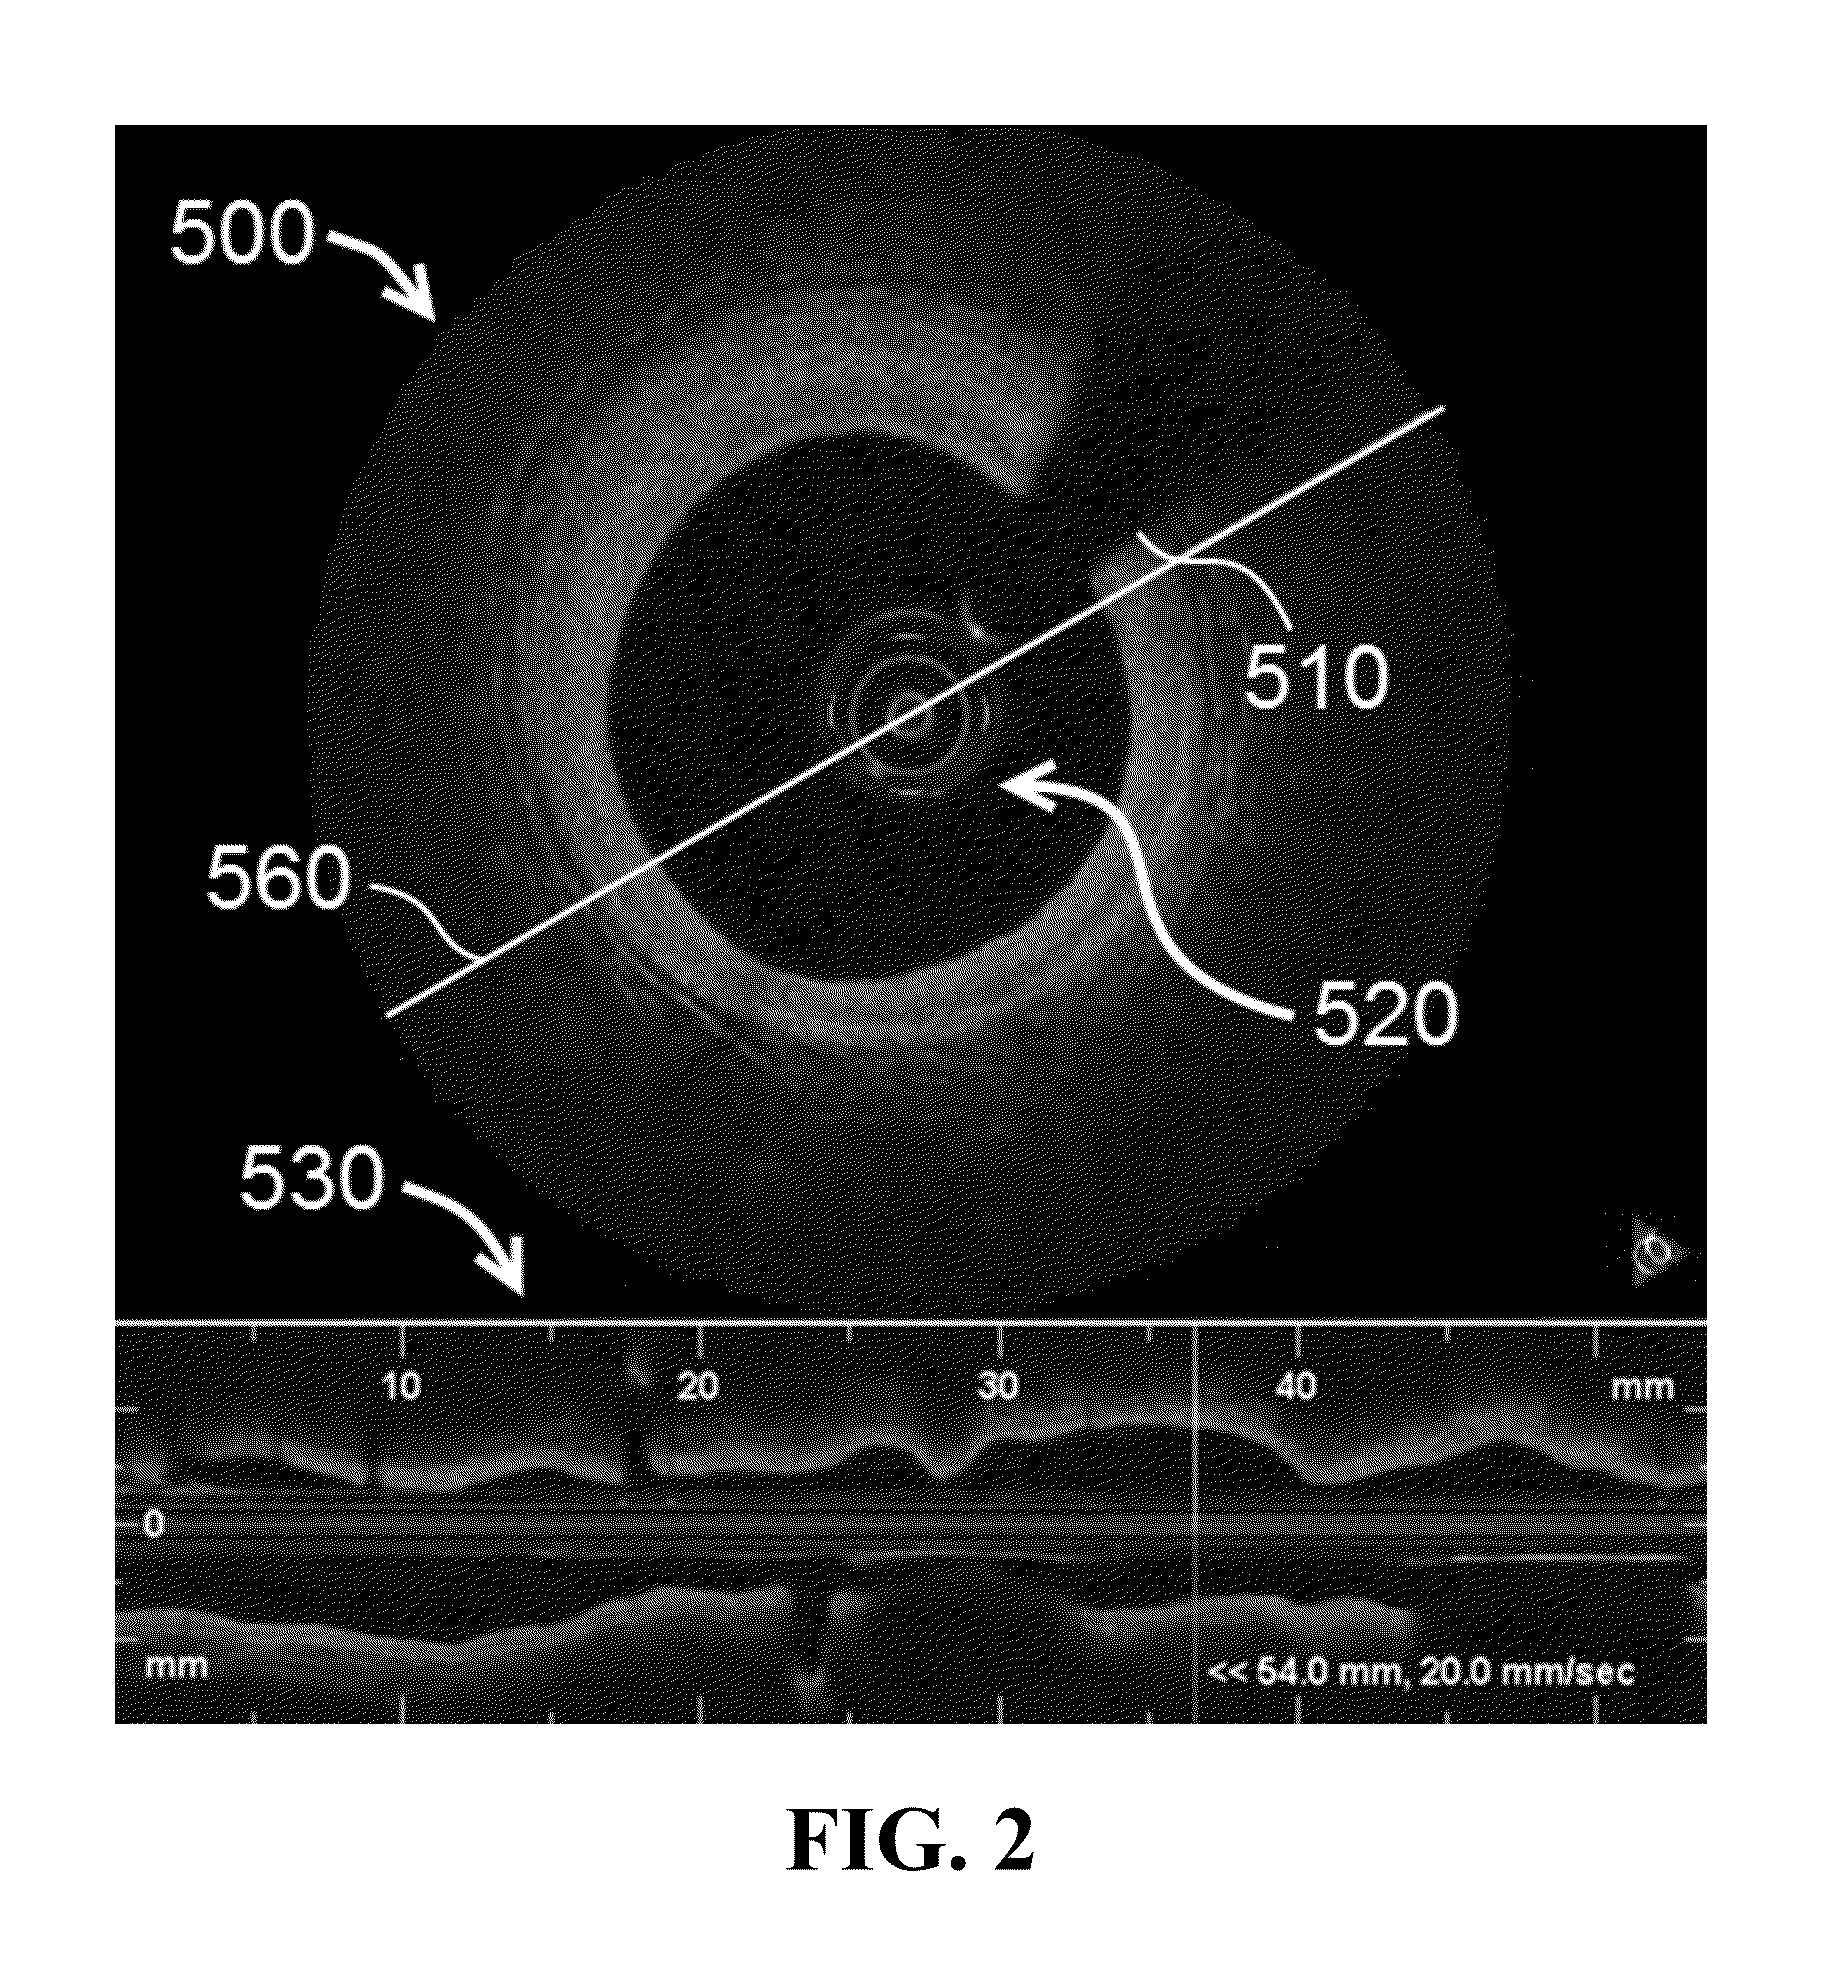 Apparatus and methods for optical coherence tomography and two-photon luminescence imaging